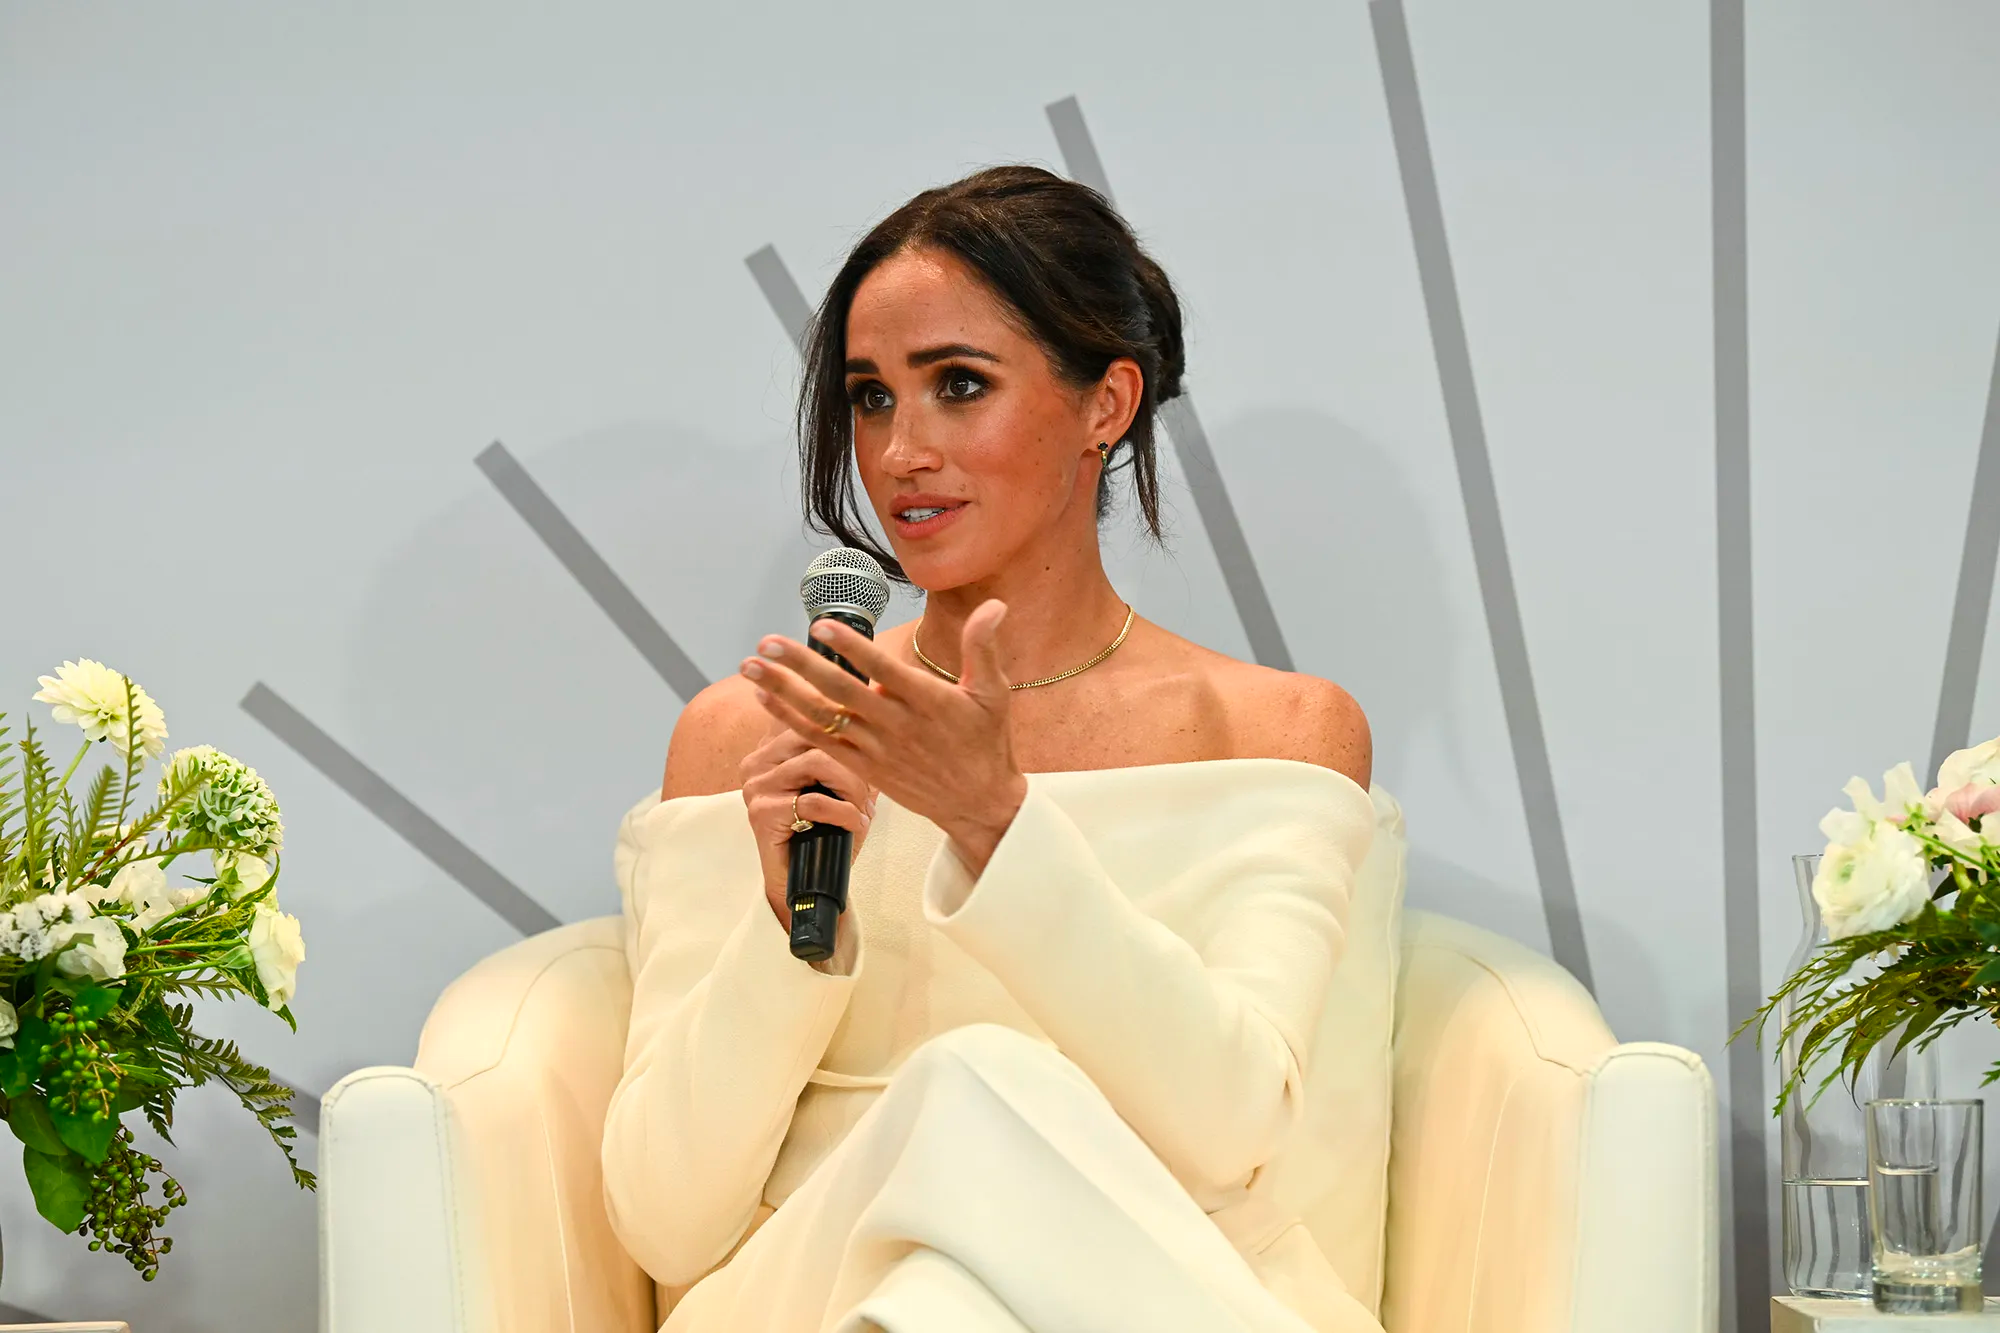 Meghan Markle is sitting and talking into a microphone.